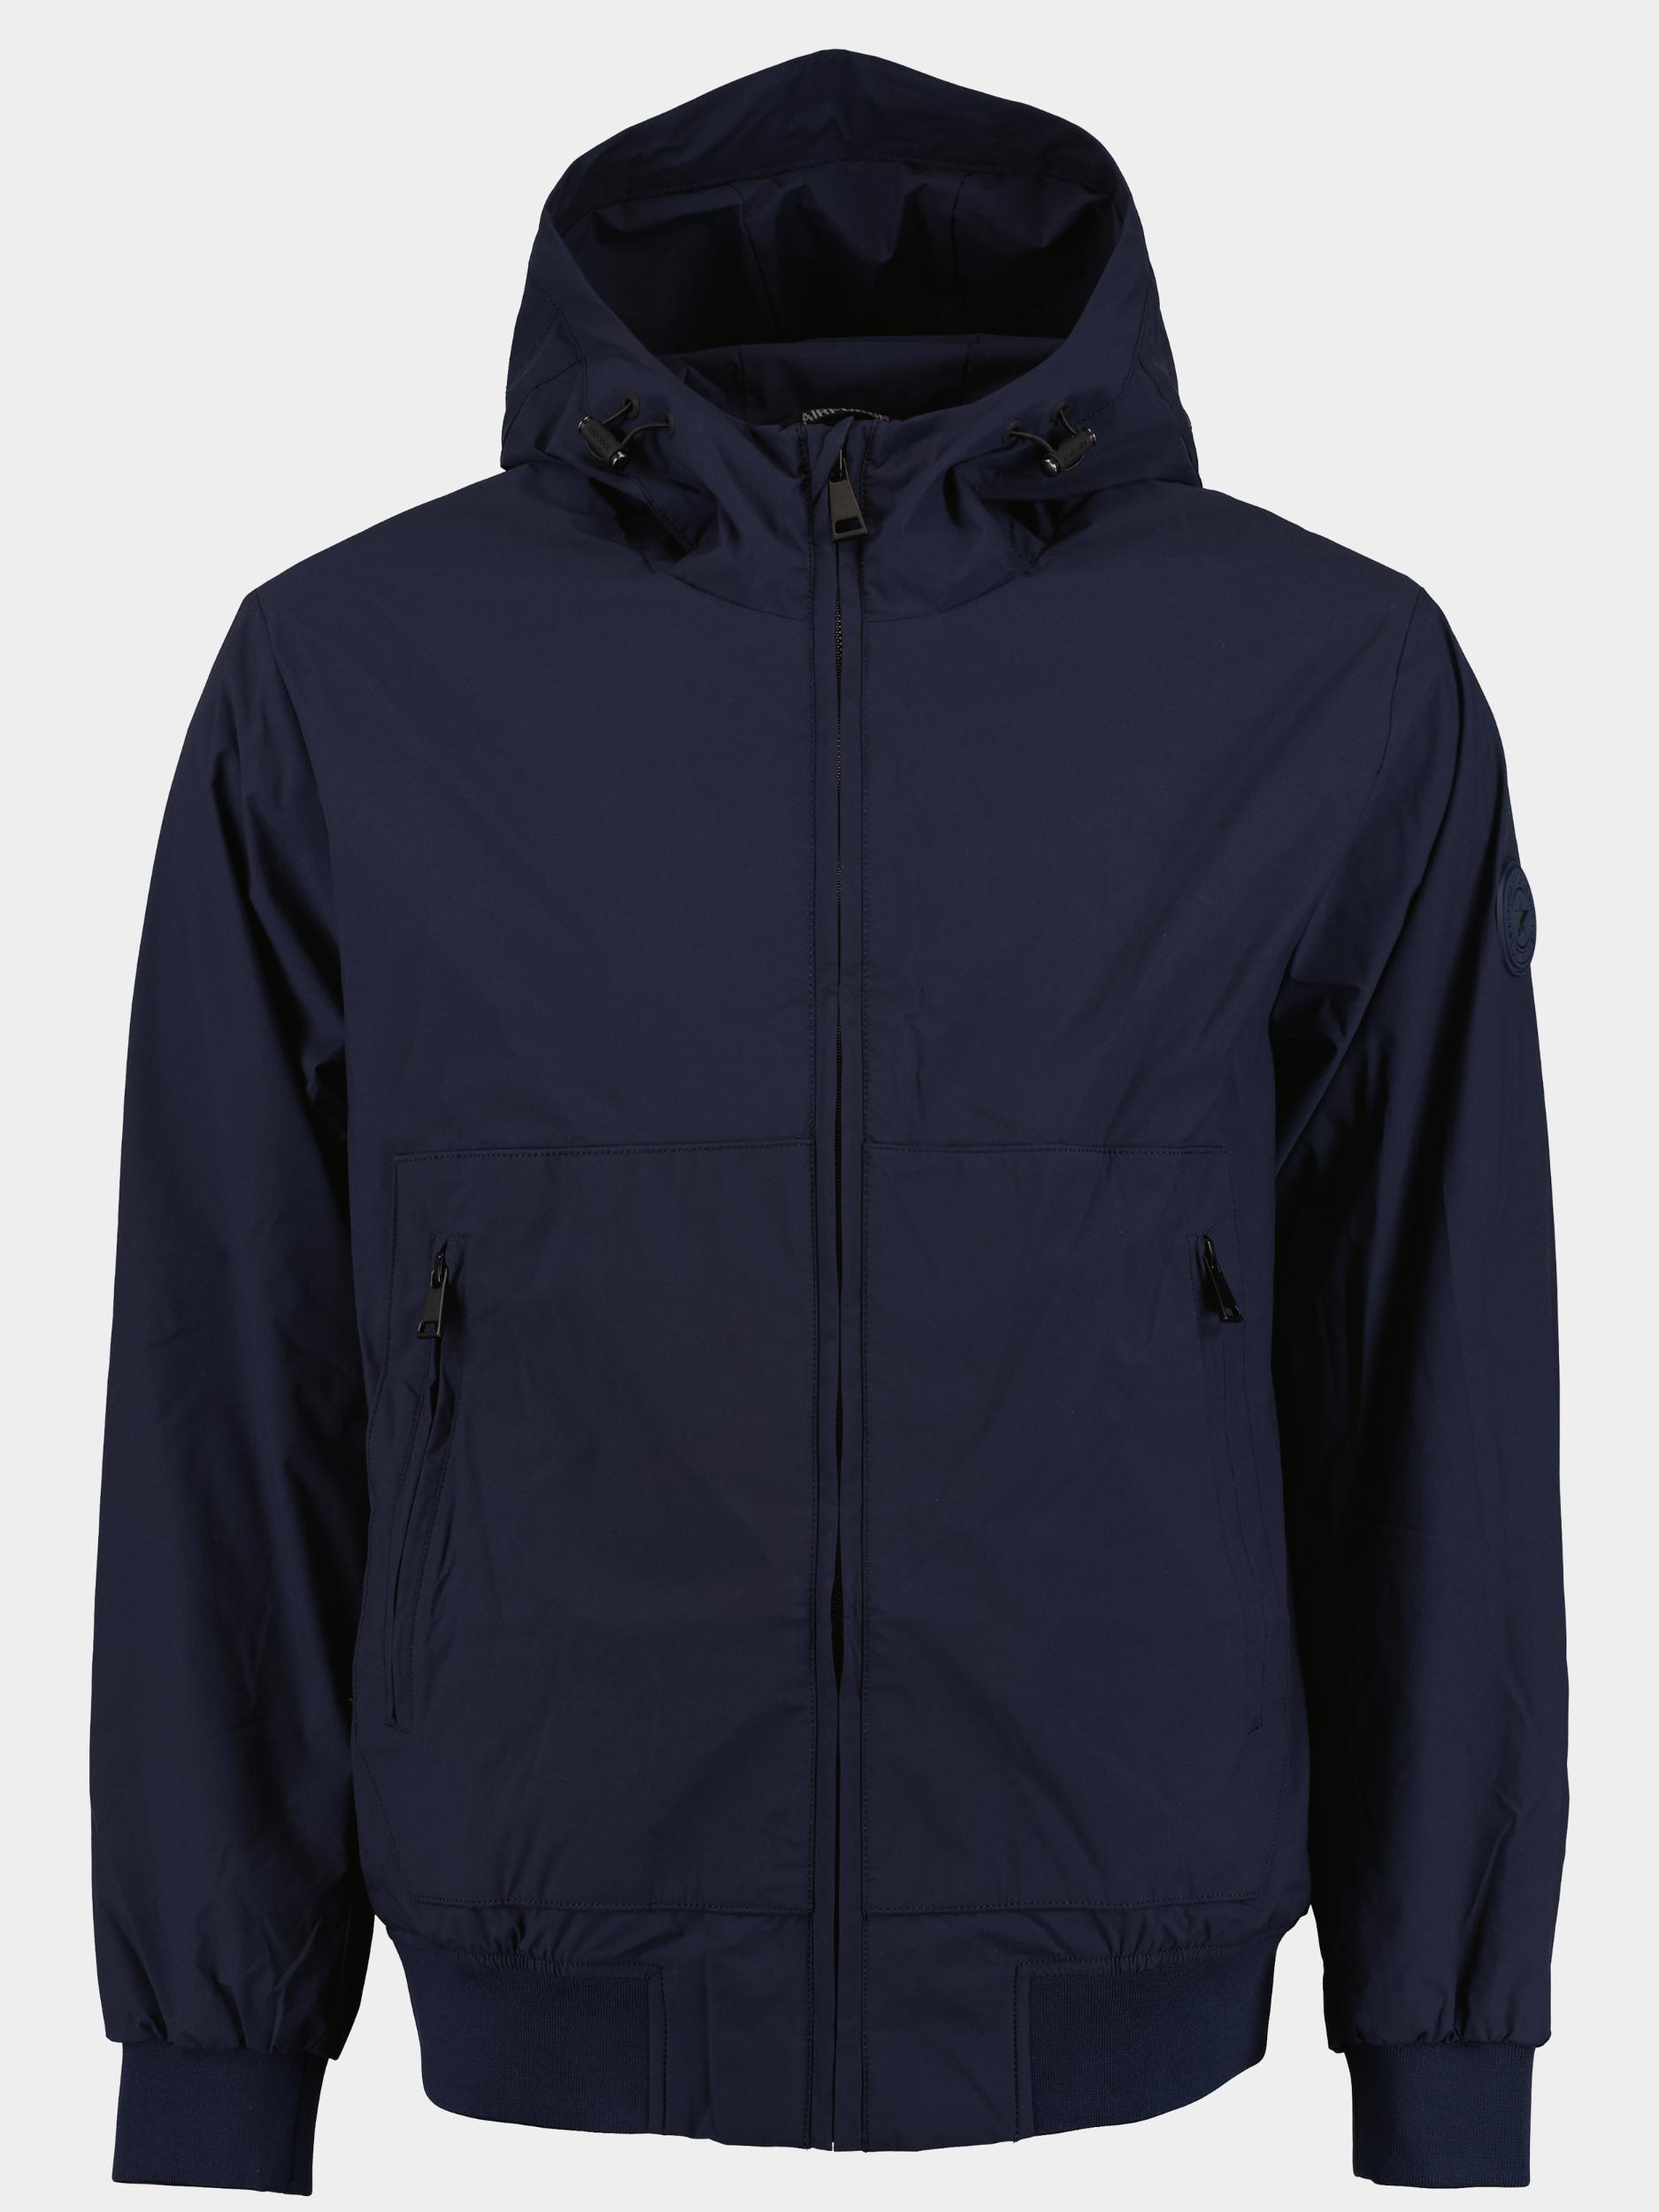 Afbeelding van Airforce Zomerjack hooded four-way stretch jacket frm0962/545